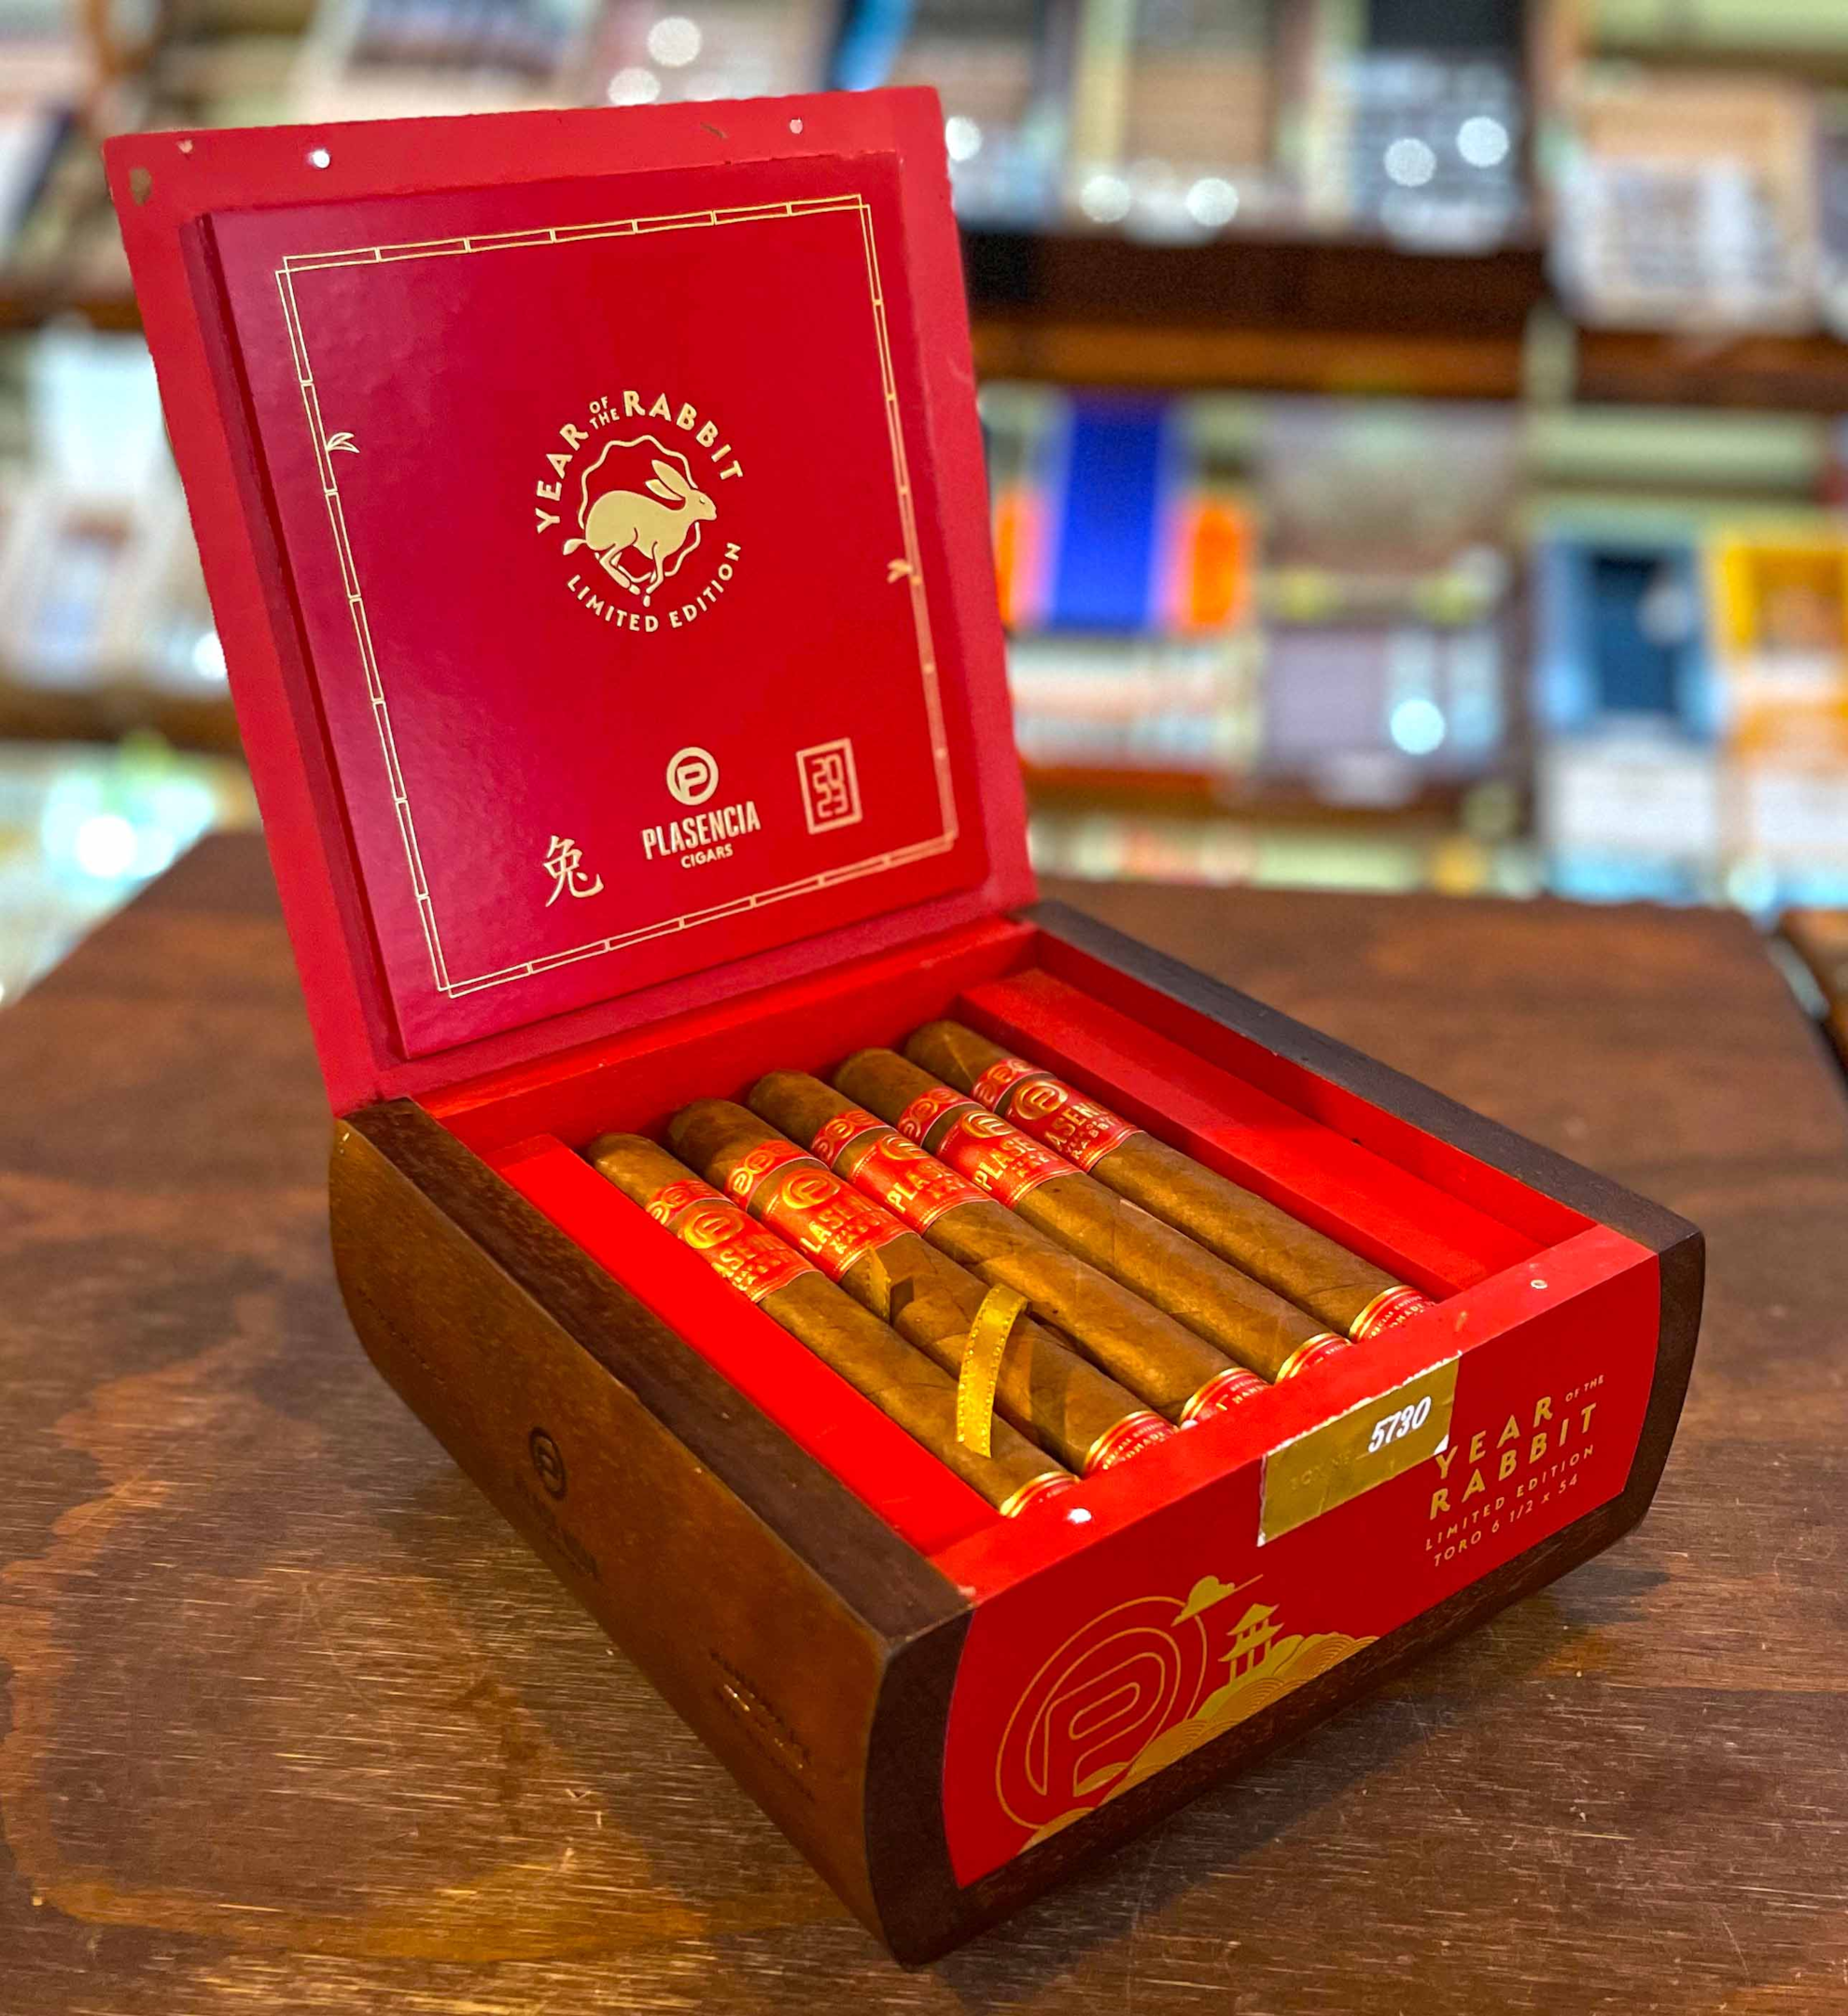 Plasencia Year of the Rabbit Cigar is here!